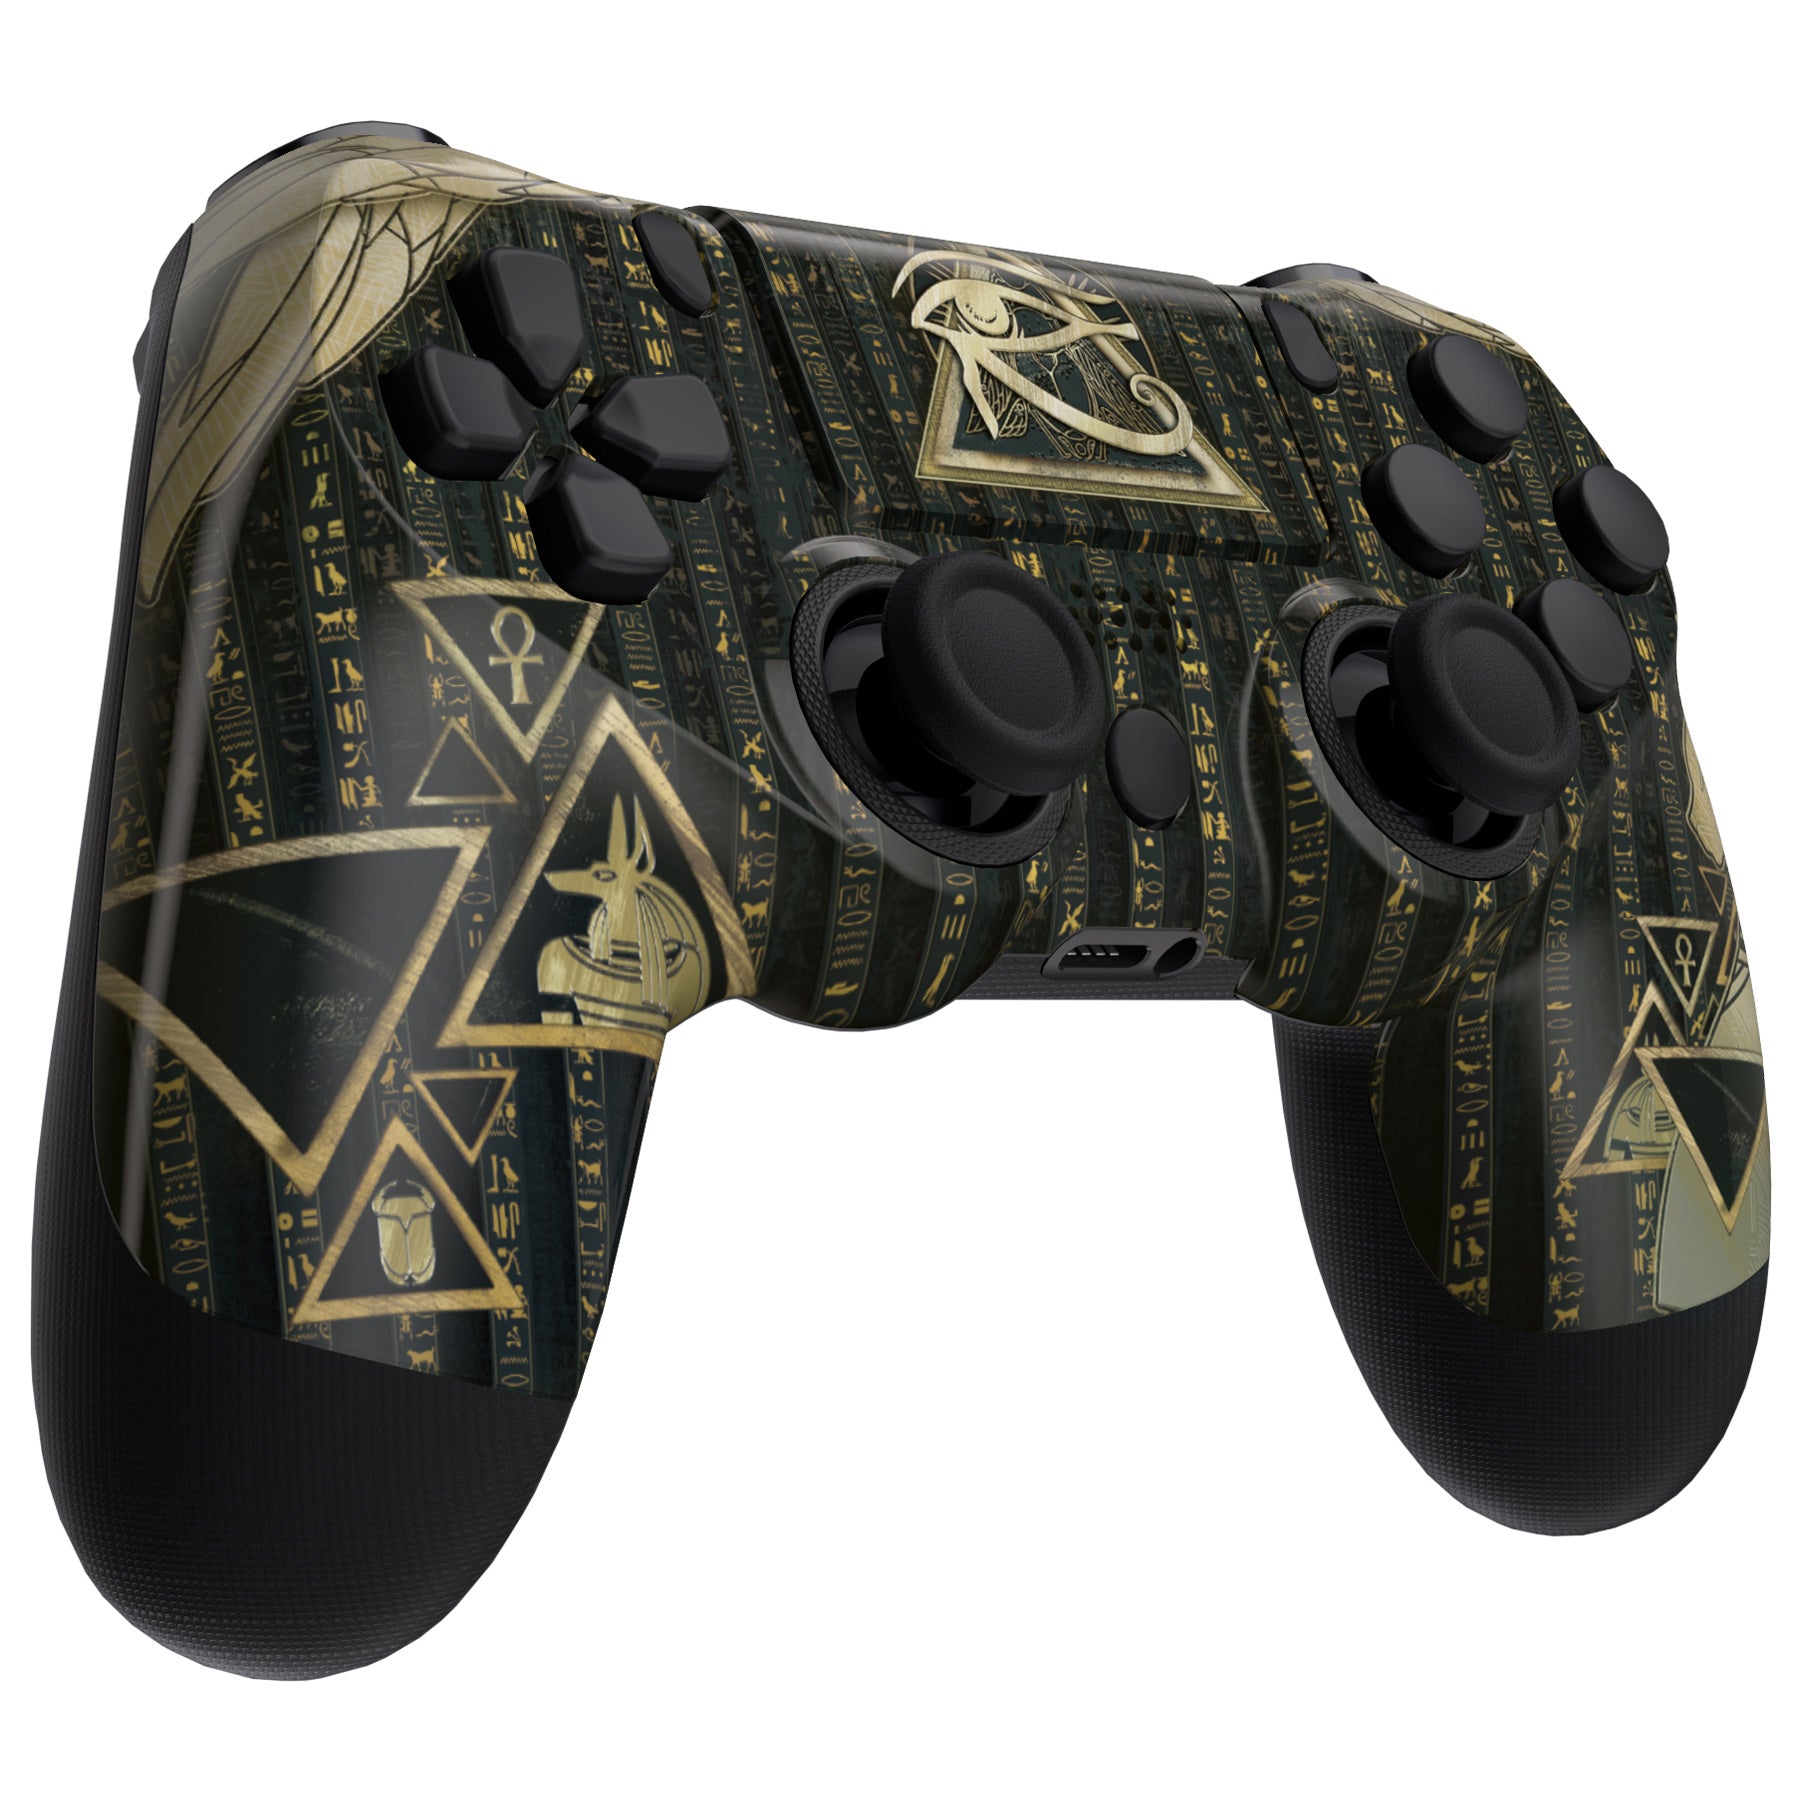 eXtremeRate Ghost Redesigned Front Housing Shell with Touch Pad Compatible  with PS4 Slim Pro Controller JDM-040/050/055 - Eye of Providence Pyramid